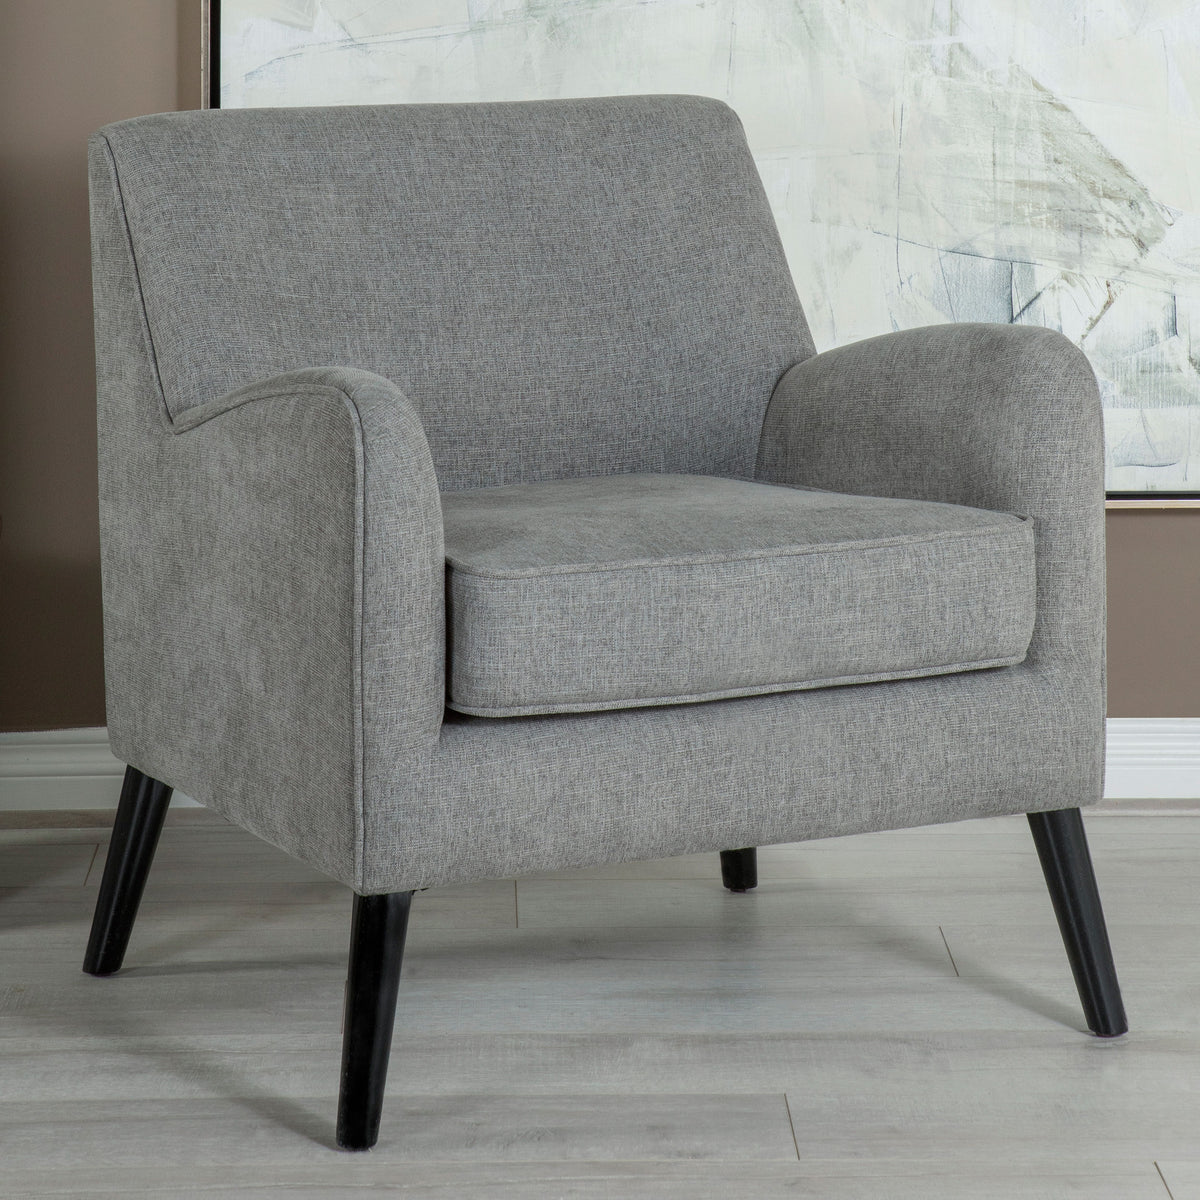 Charlie Upholstered Accent Chair with Reversible Seat Cushion - Half Price Furniture